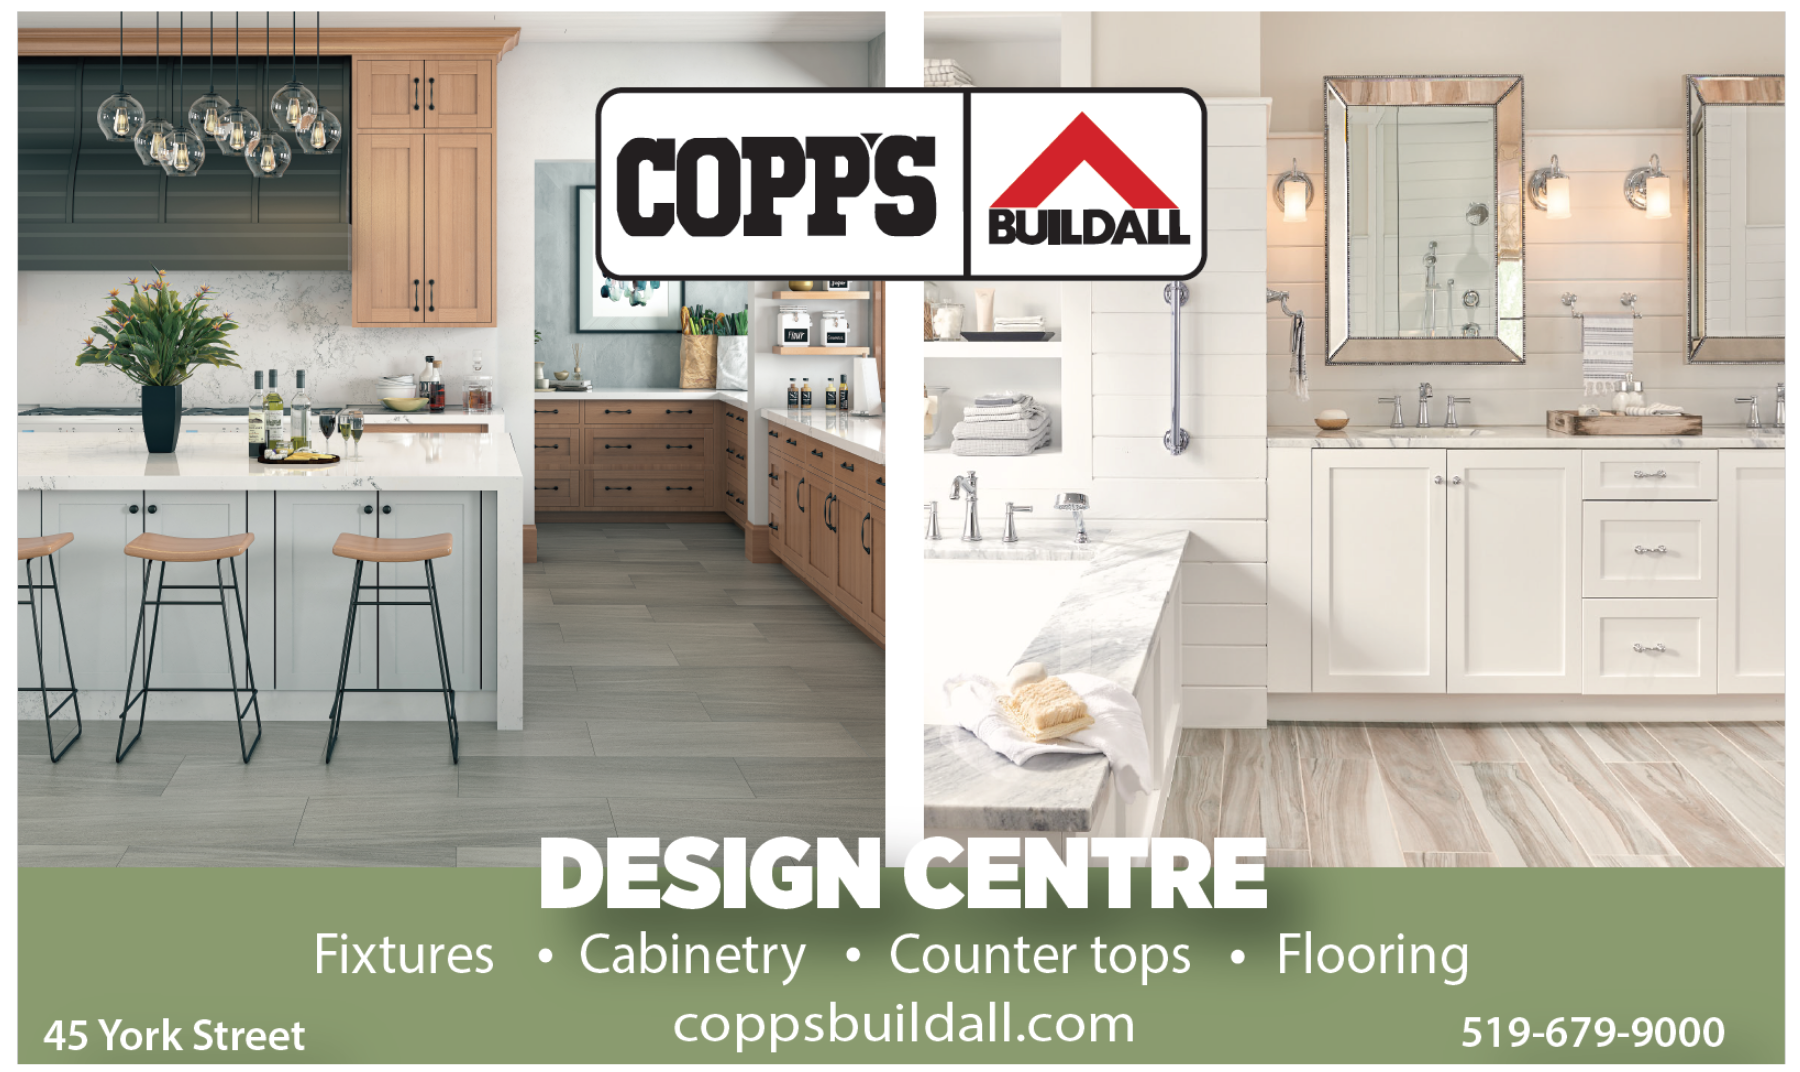 Copps Buildall